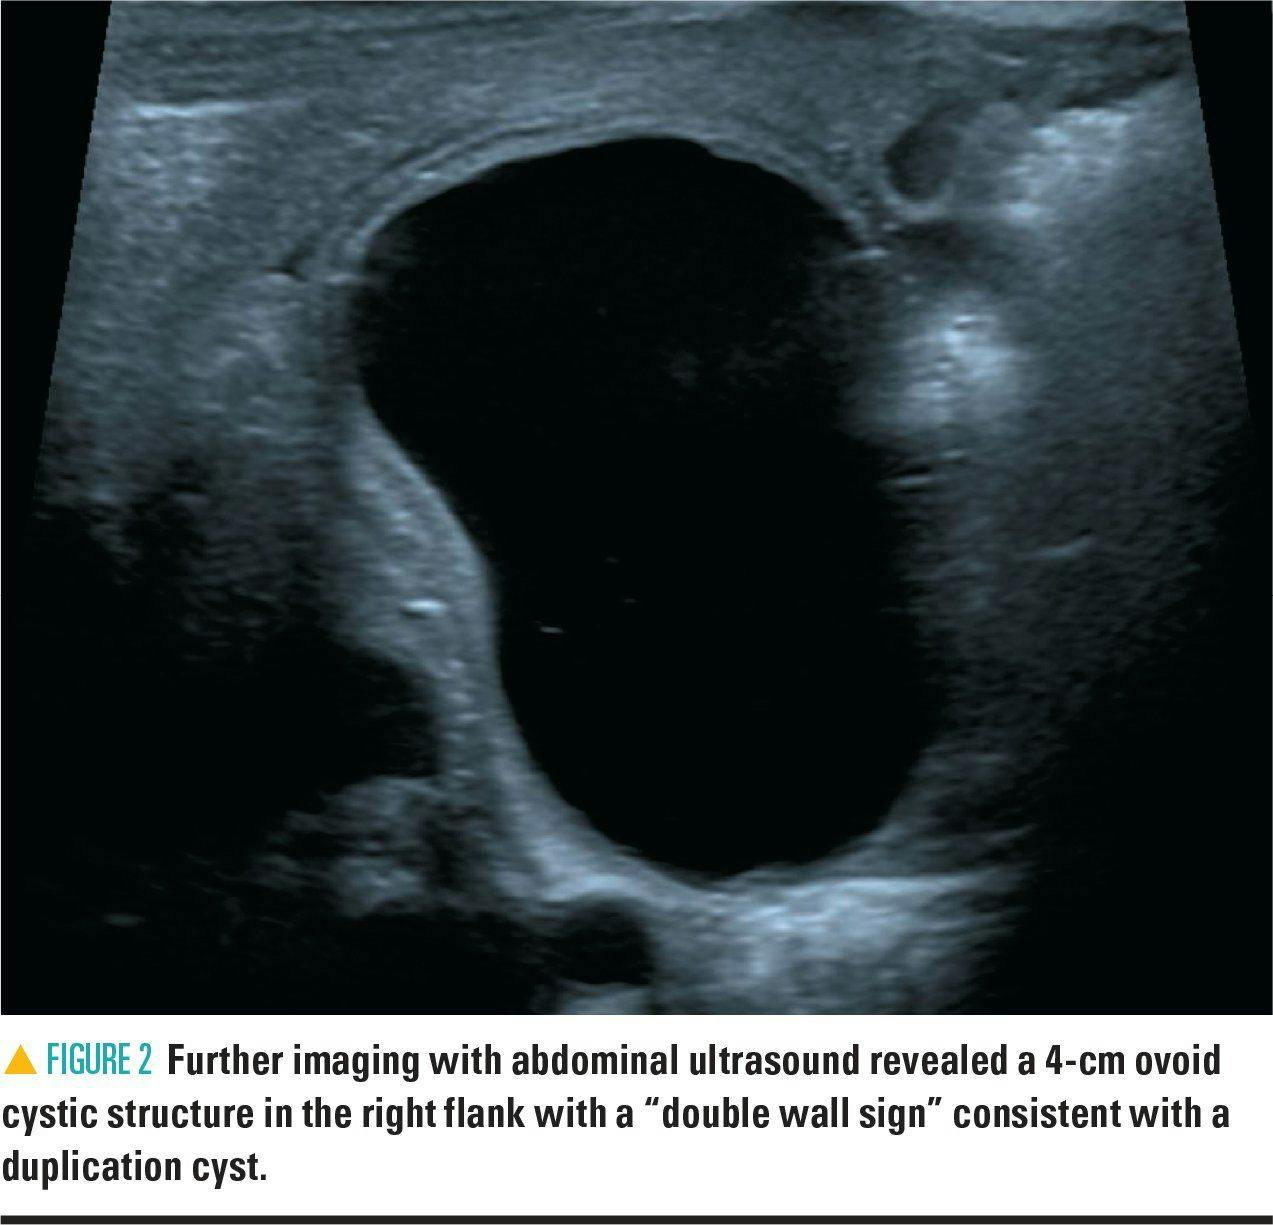 further imaging showing 'double wall sign' consistent with a duplication cyst